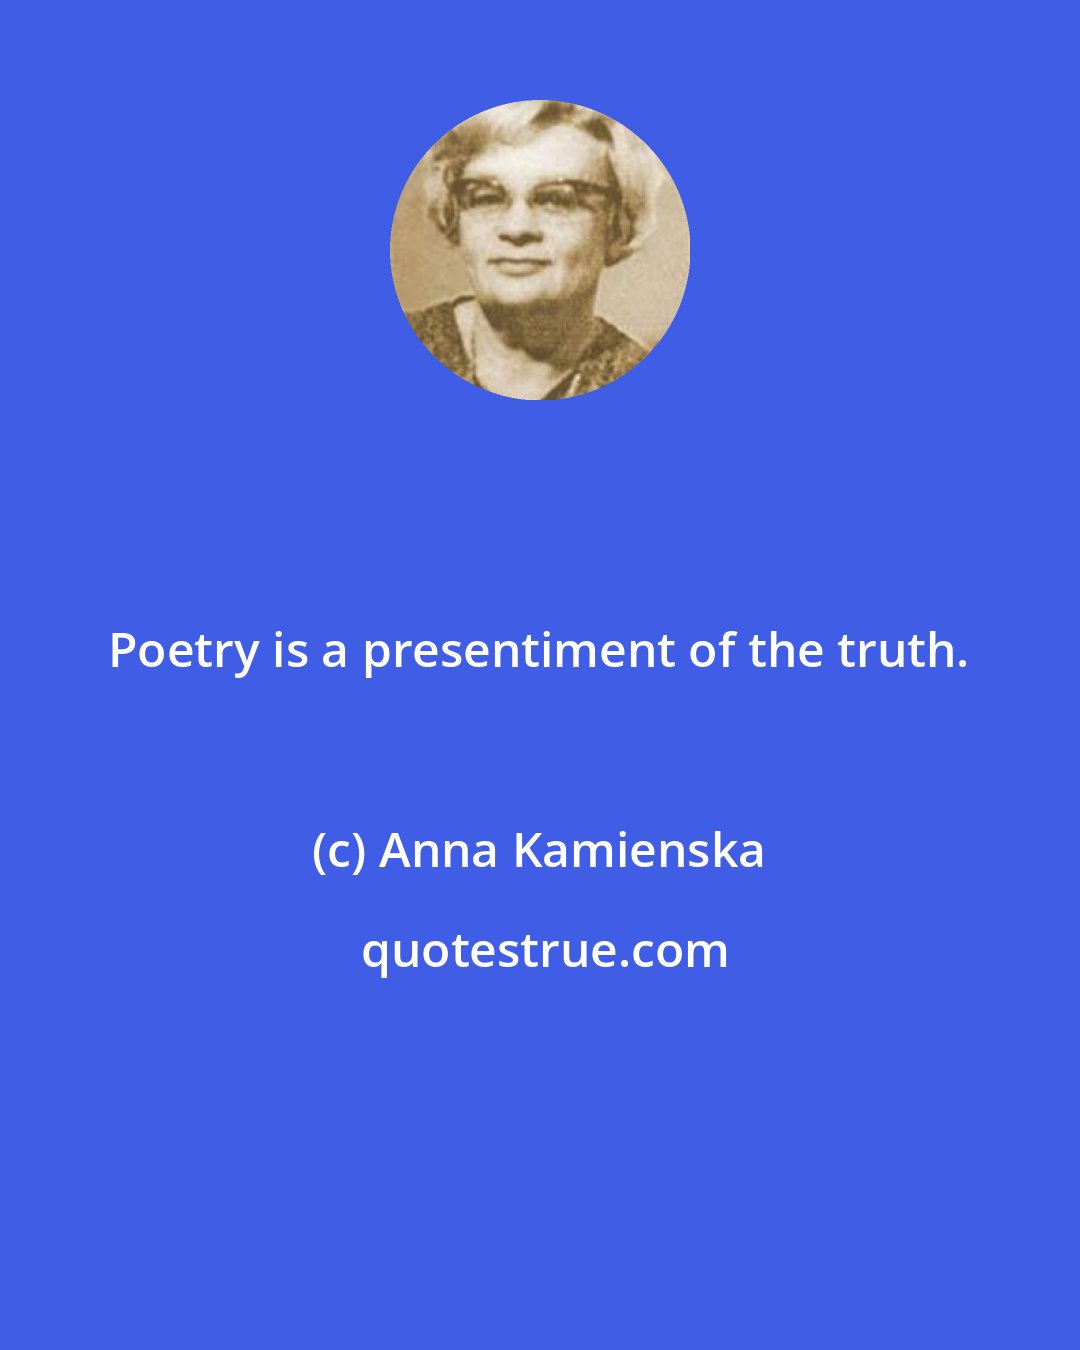 Anna Kamienska: Poetry is a presentiment of the truth.